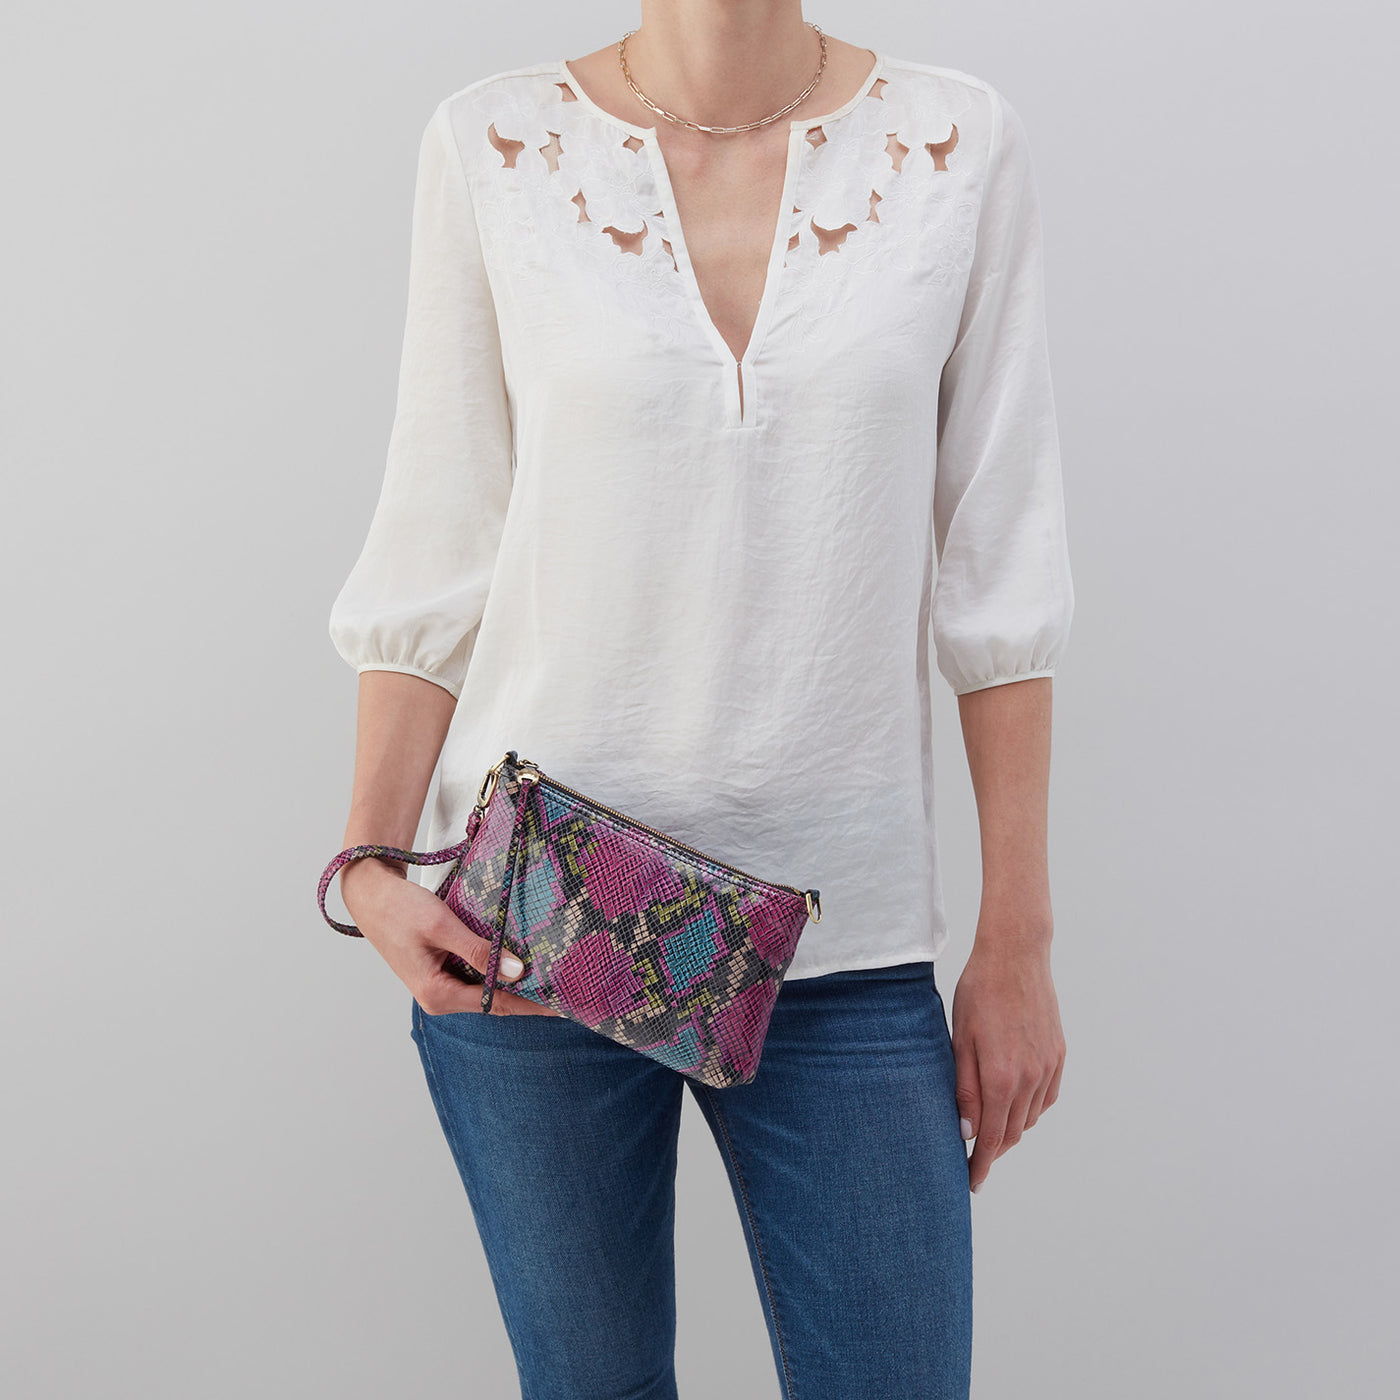 Darcy Crossbody In Printed Leather